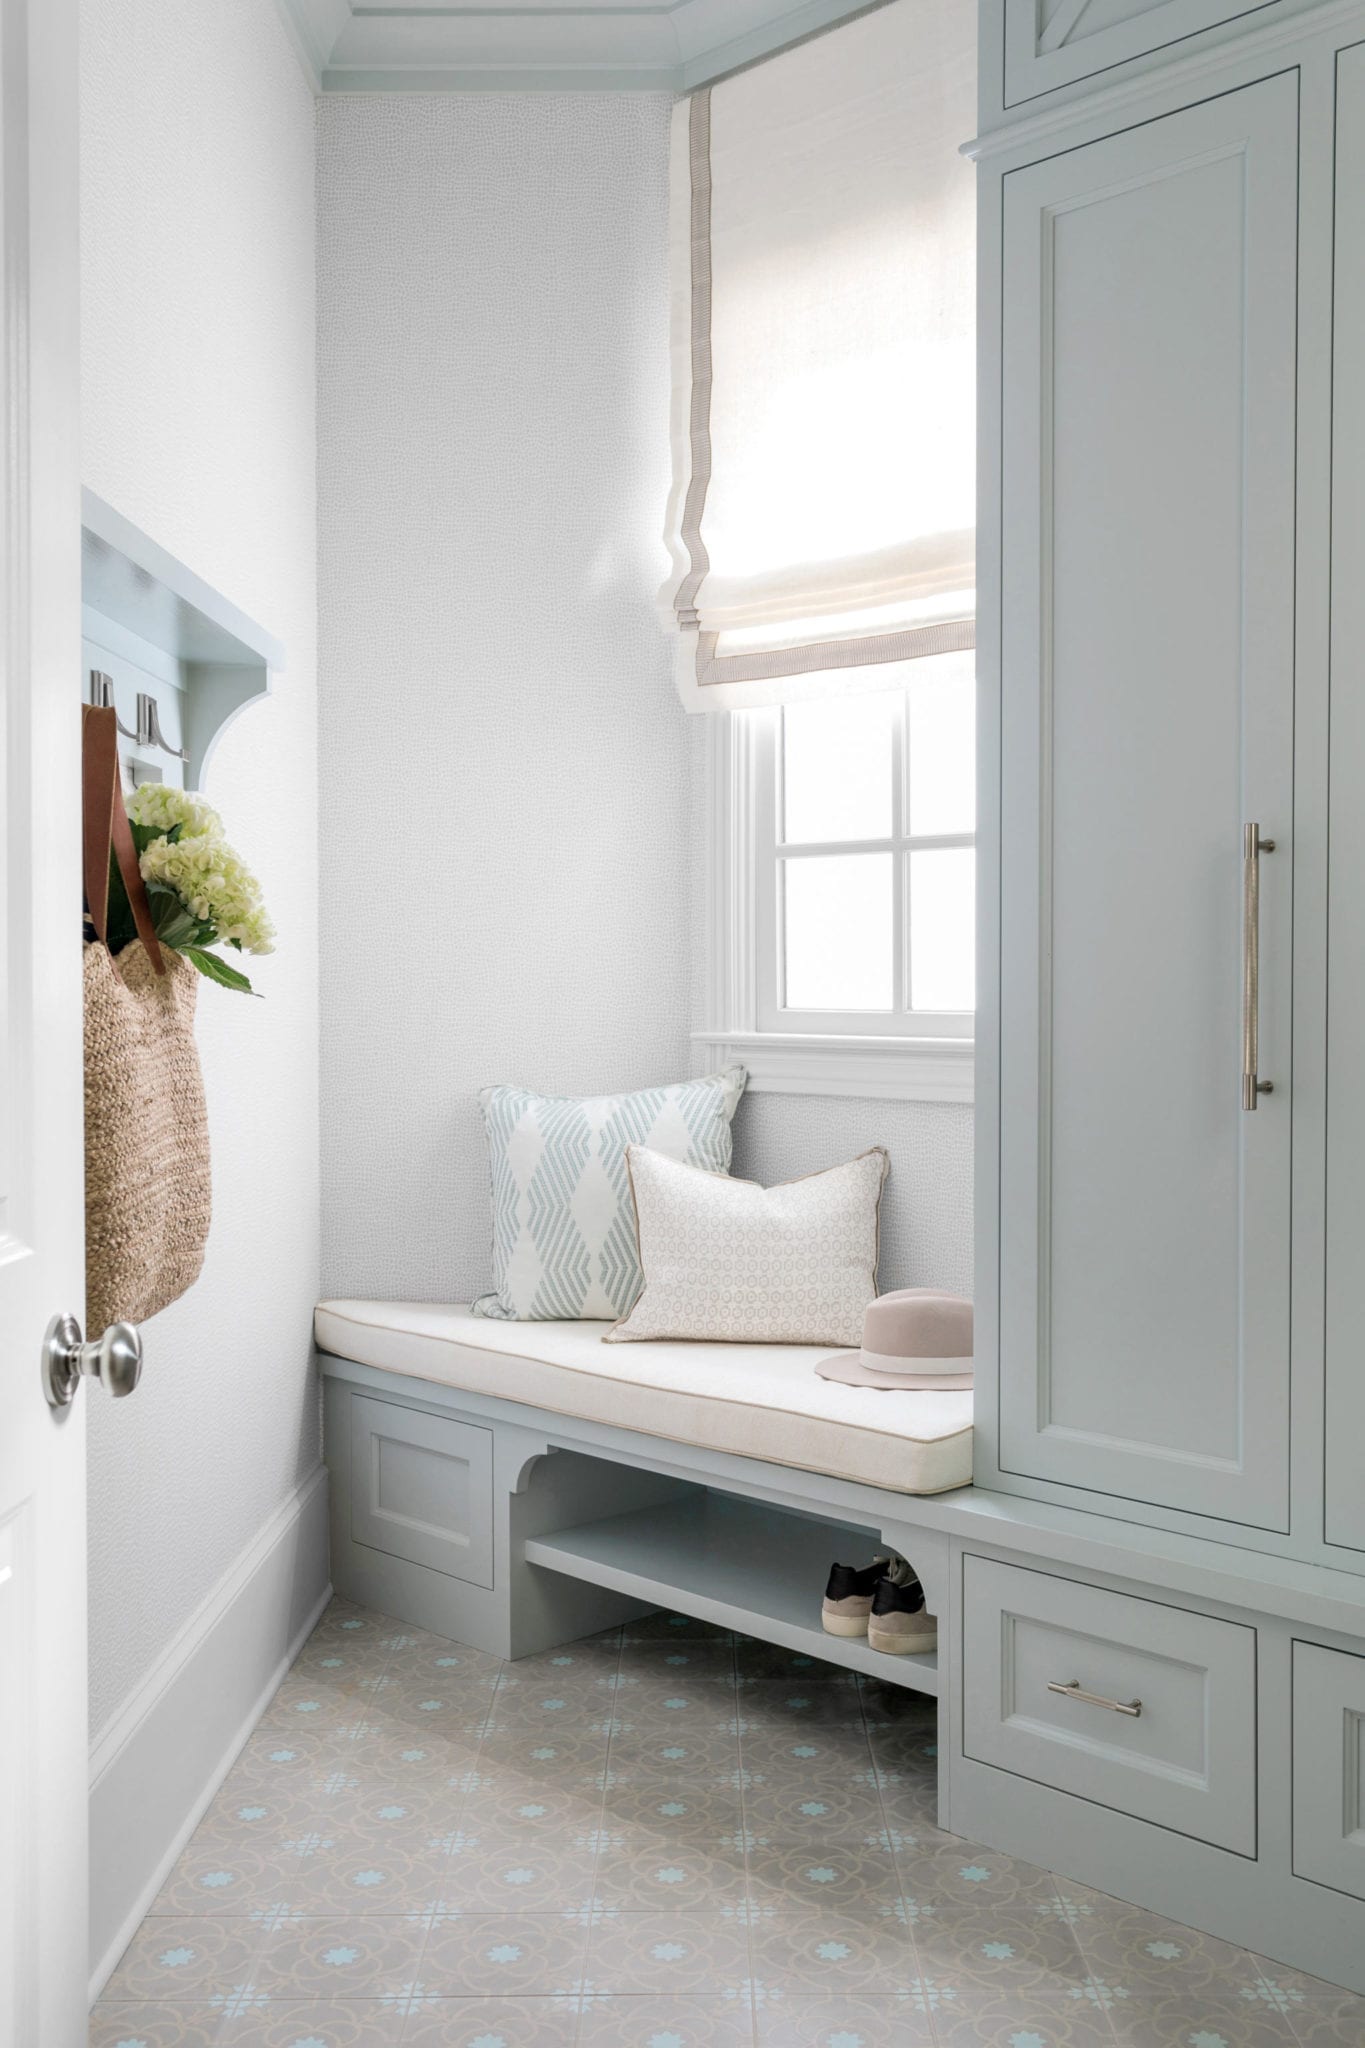 Mudroom Built In Cabinet Ideas with built in shoe storage, mudroom bench, blue cabinets and window covered in roman shade.